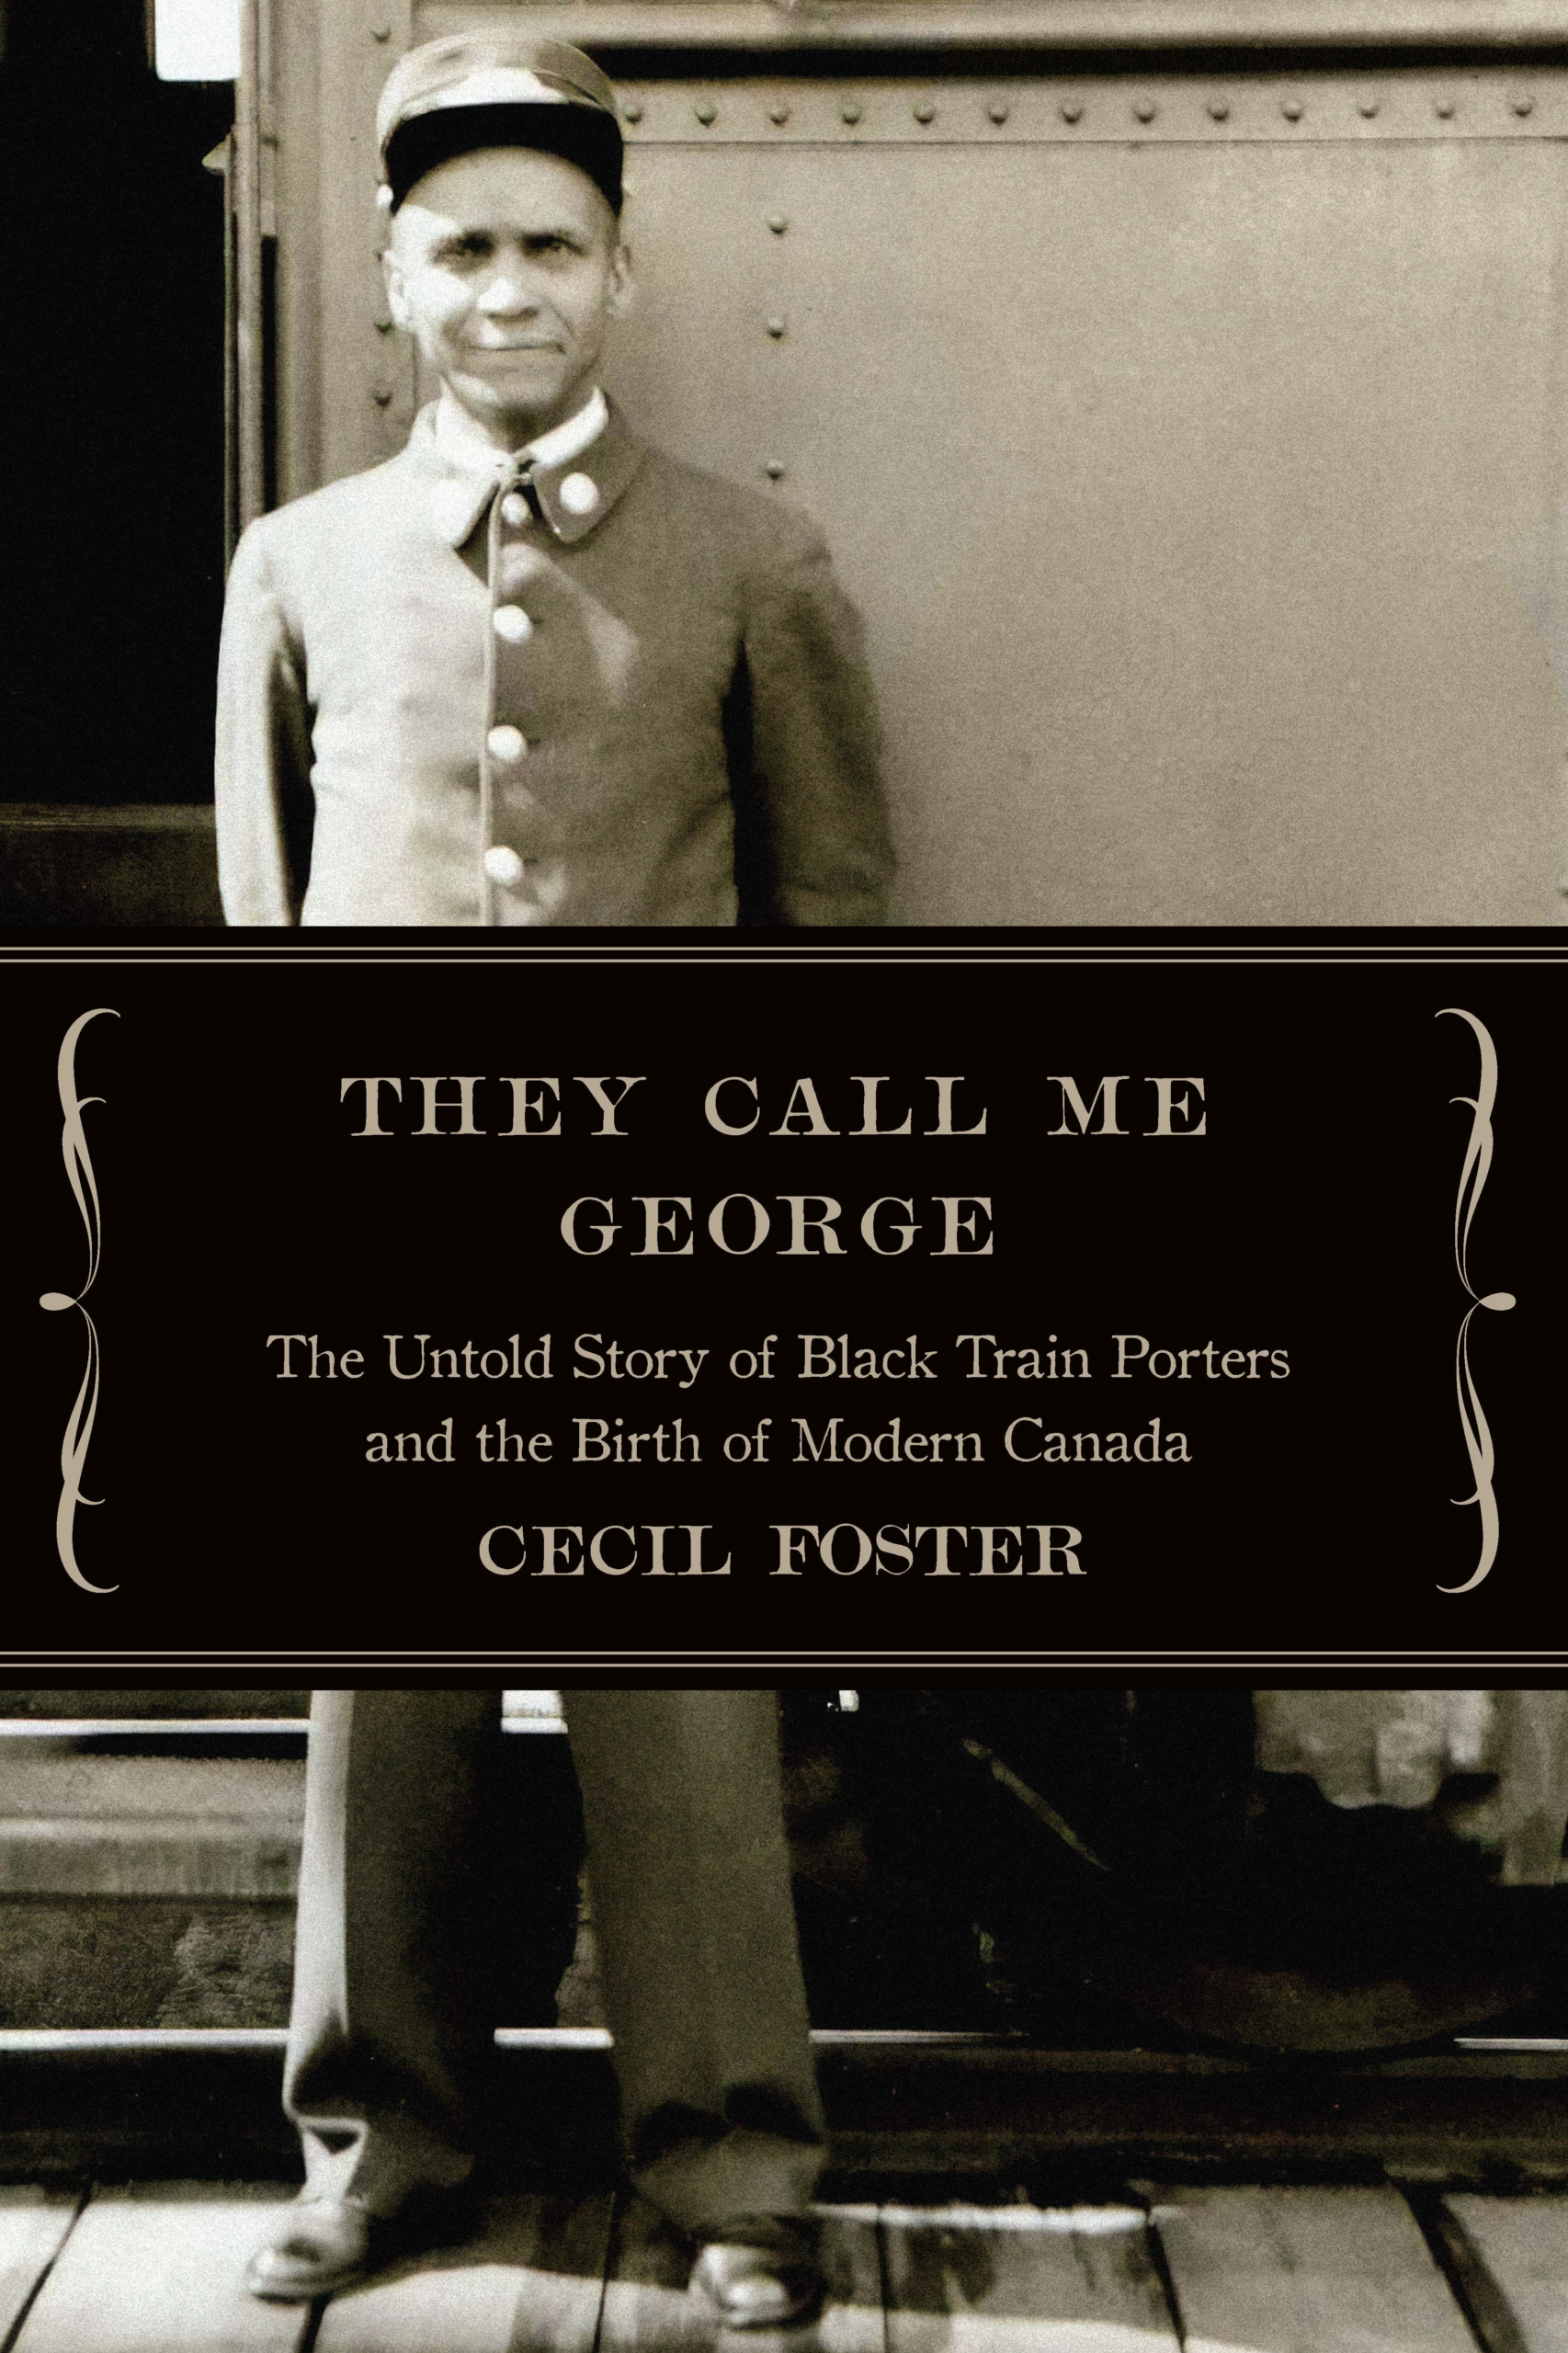 The cover of They Call Me George by Cecil Foster.